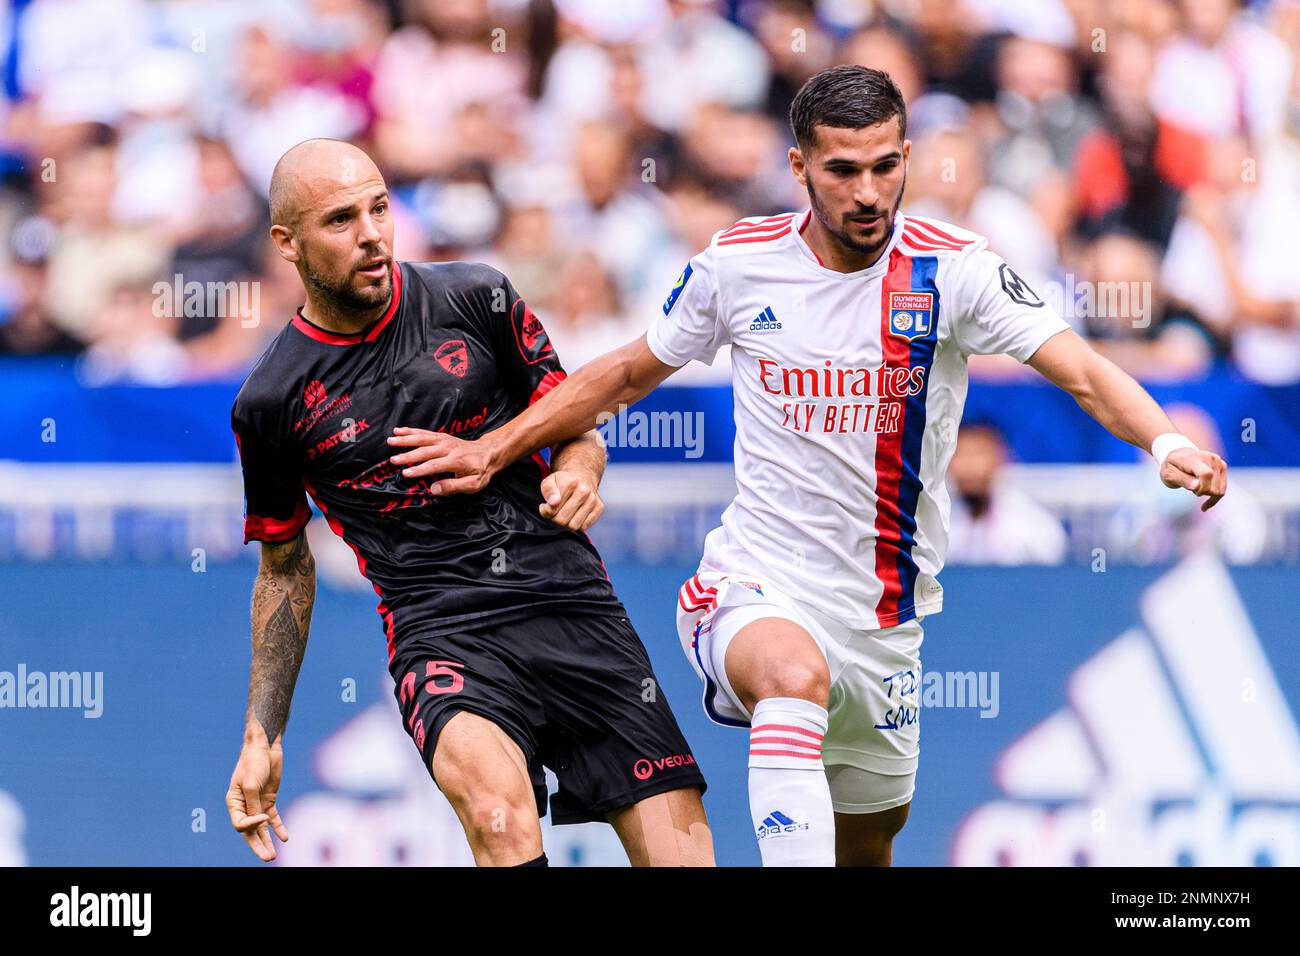 August 22, 2021, Lyon, France: Lyon, France - August 22: Johan Gastien of  Clermont Foot (L) plays against Houssem Aouar of Olympique Lyon (R) during  the Ligue 1 Uber Eats match between